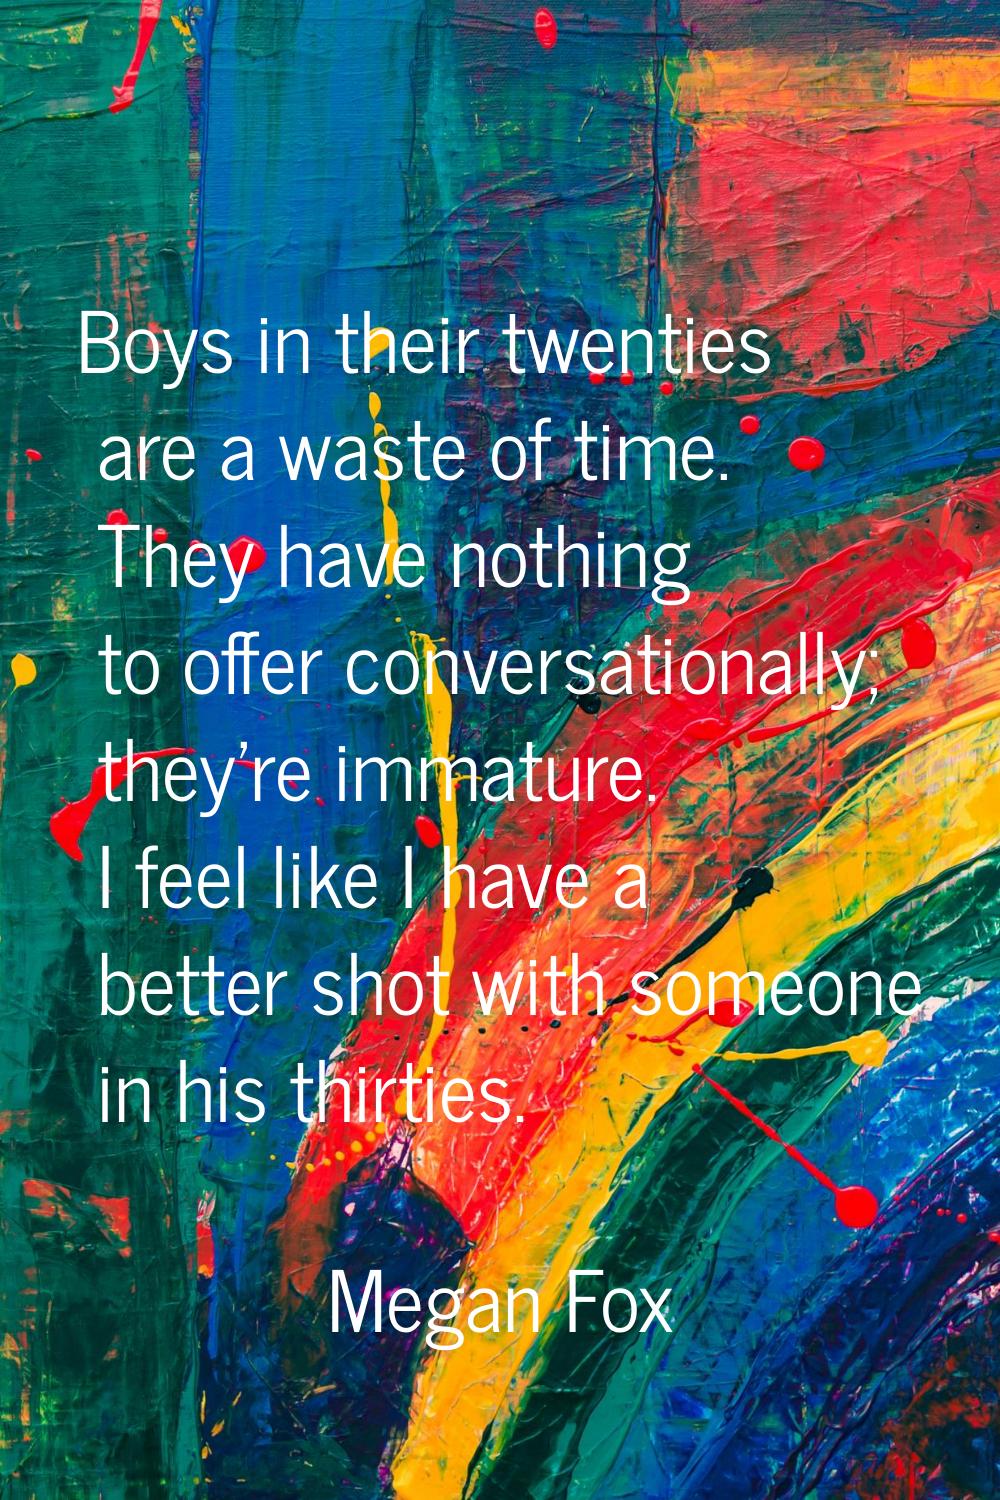 Boys in their twenties are a waste of time. They have nothing to offer conversationally; they're im